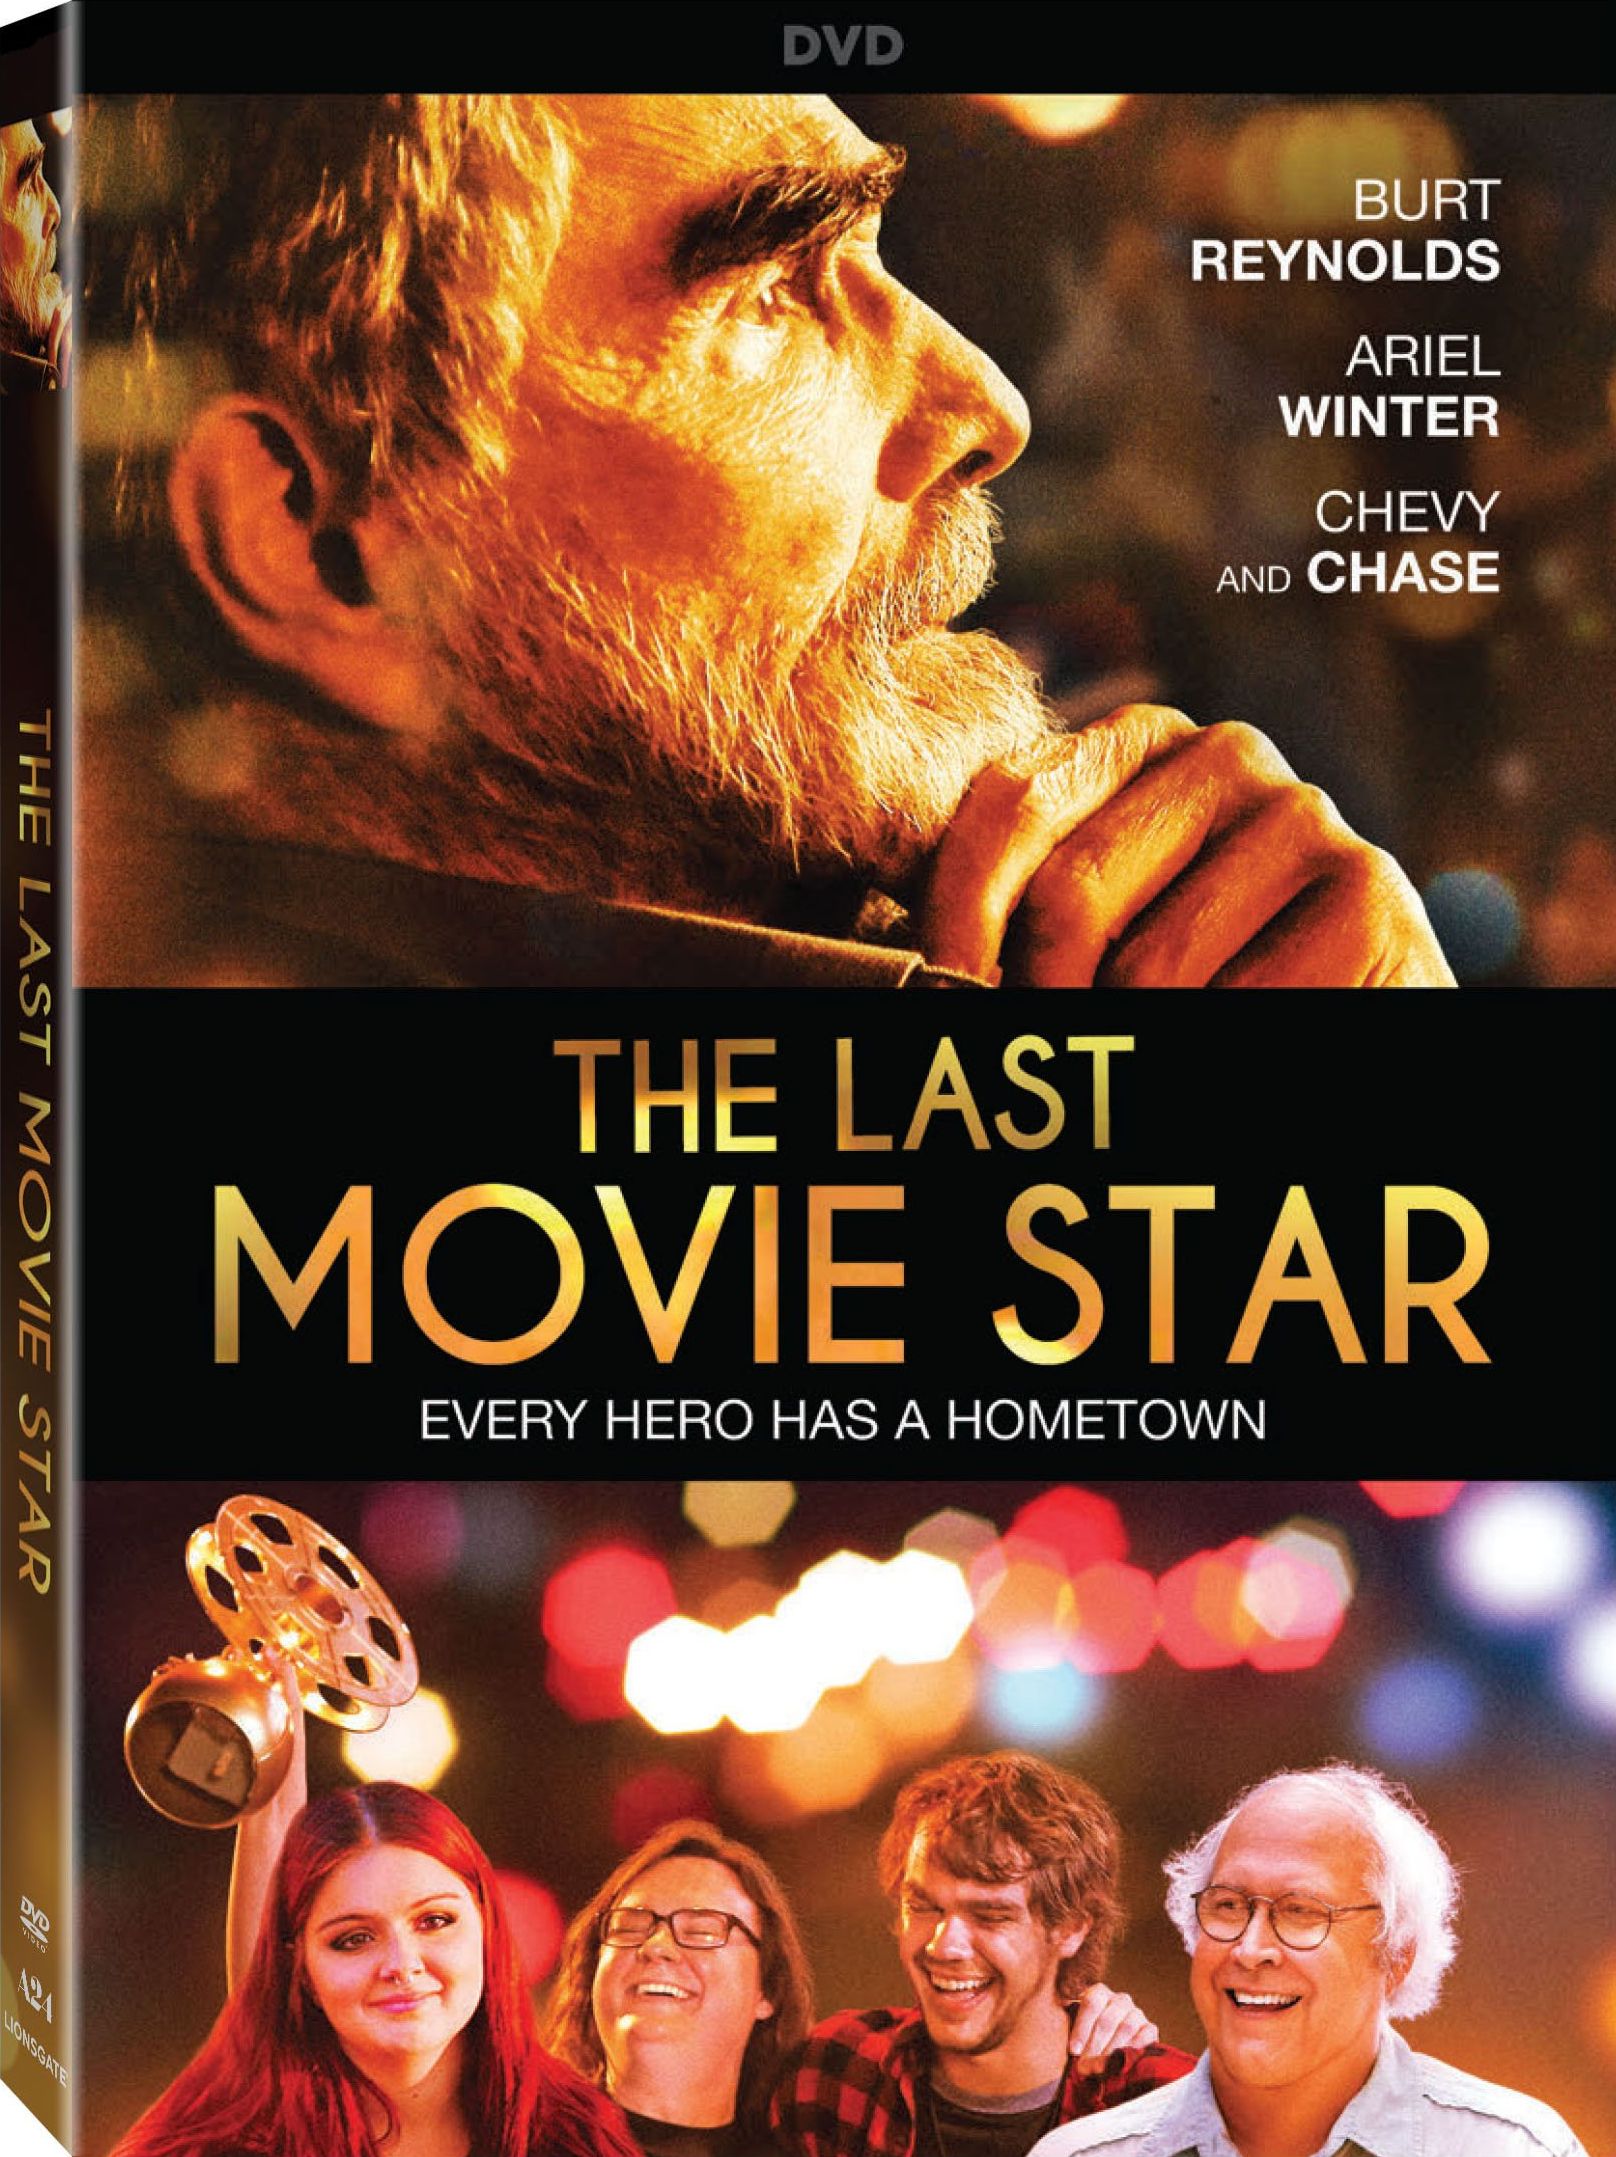 the-last-movie-star-dvd-release-date-march-27-2018